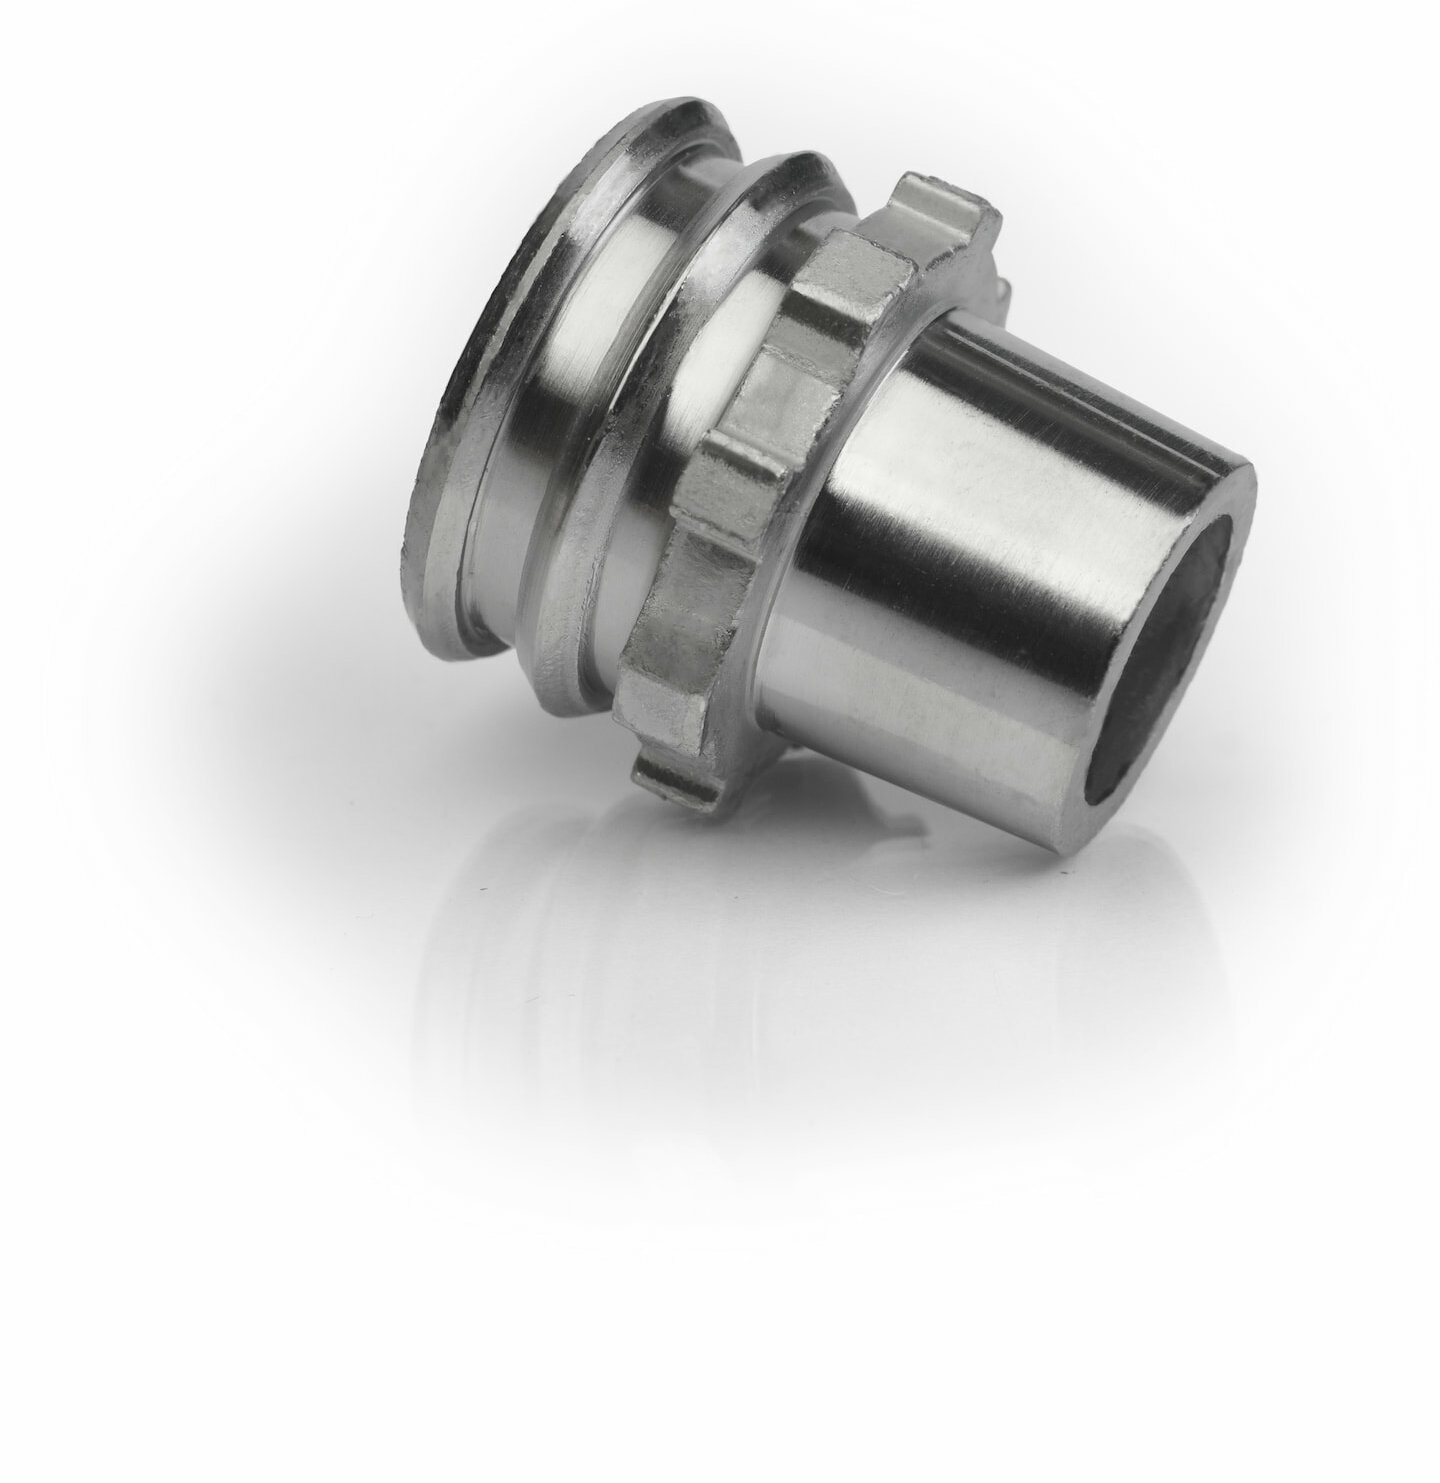 Silver shining battery bushing for medium and heavy-duty trucks lying on the side with in front of white background